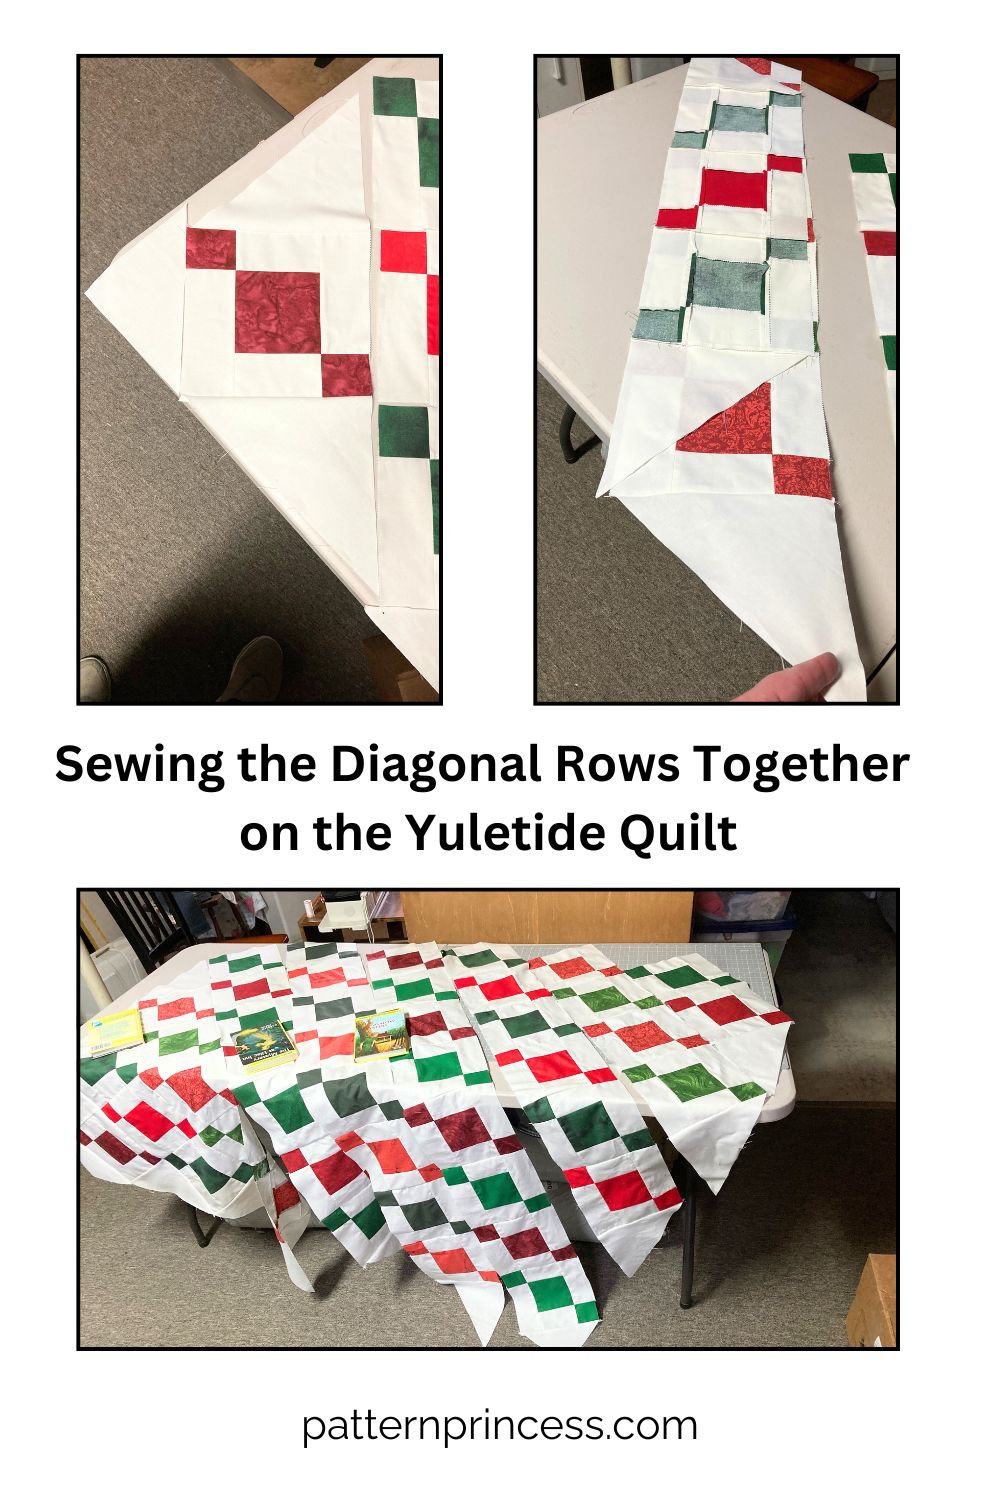 Sewing the Diagonal Rows Together on the Yuletide Quilt